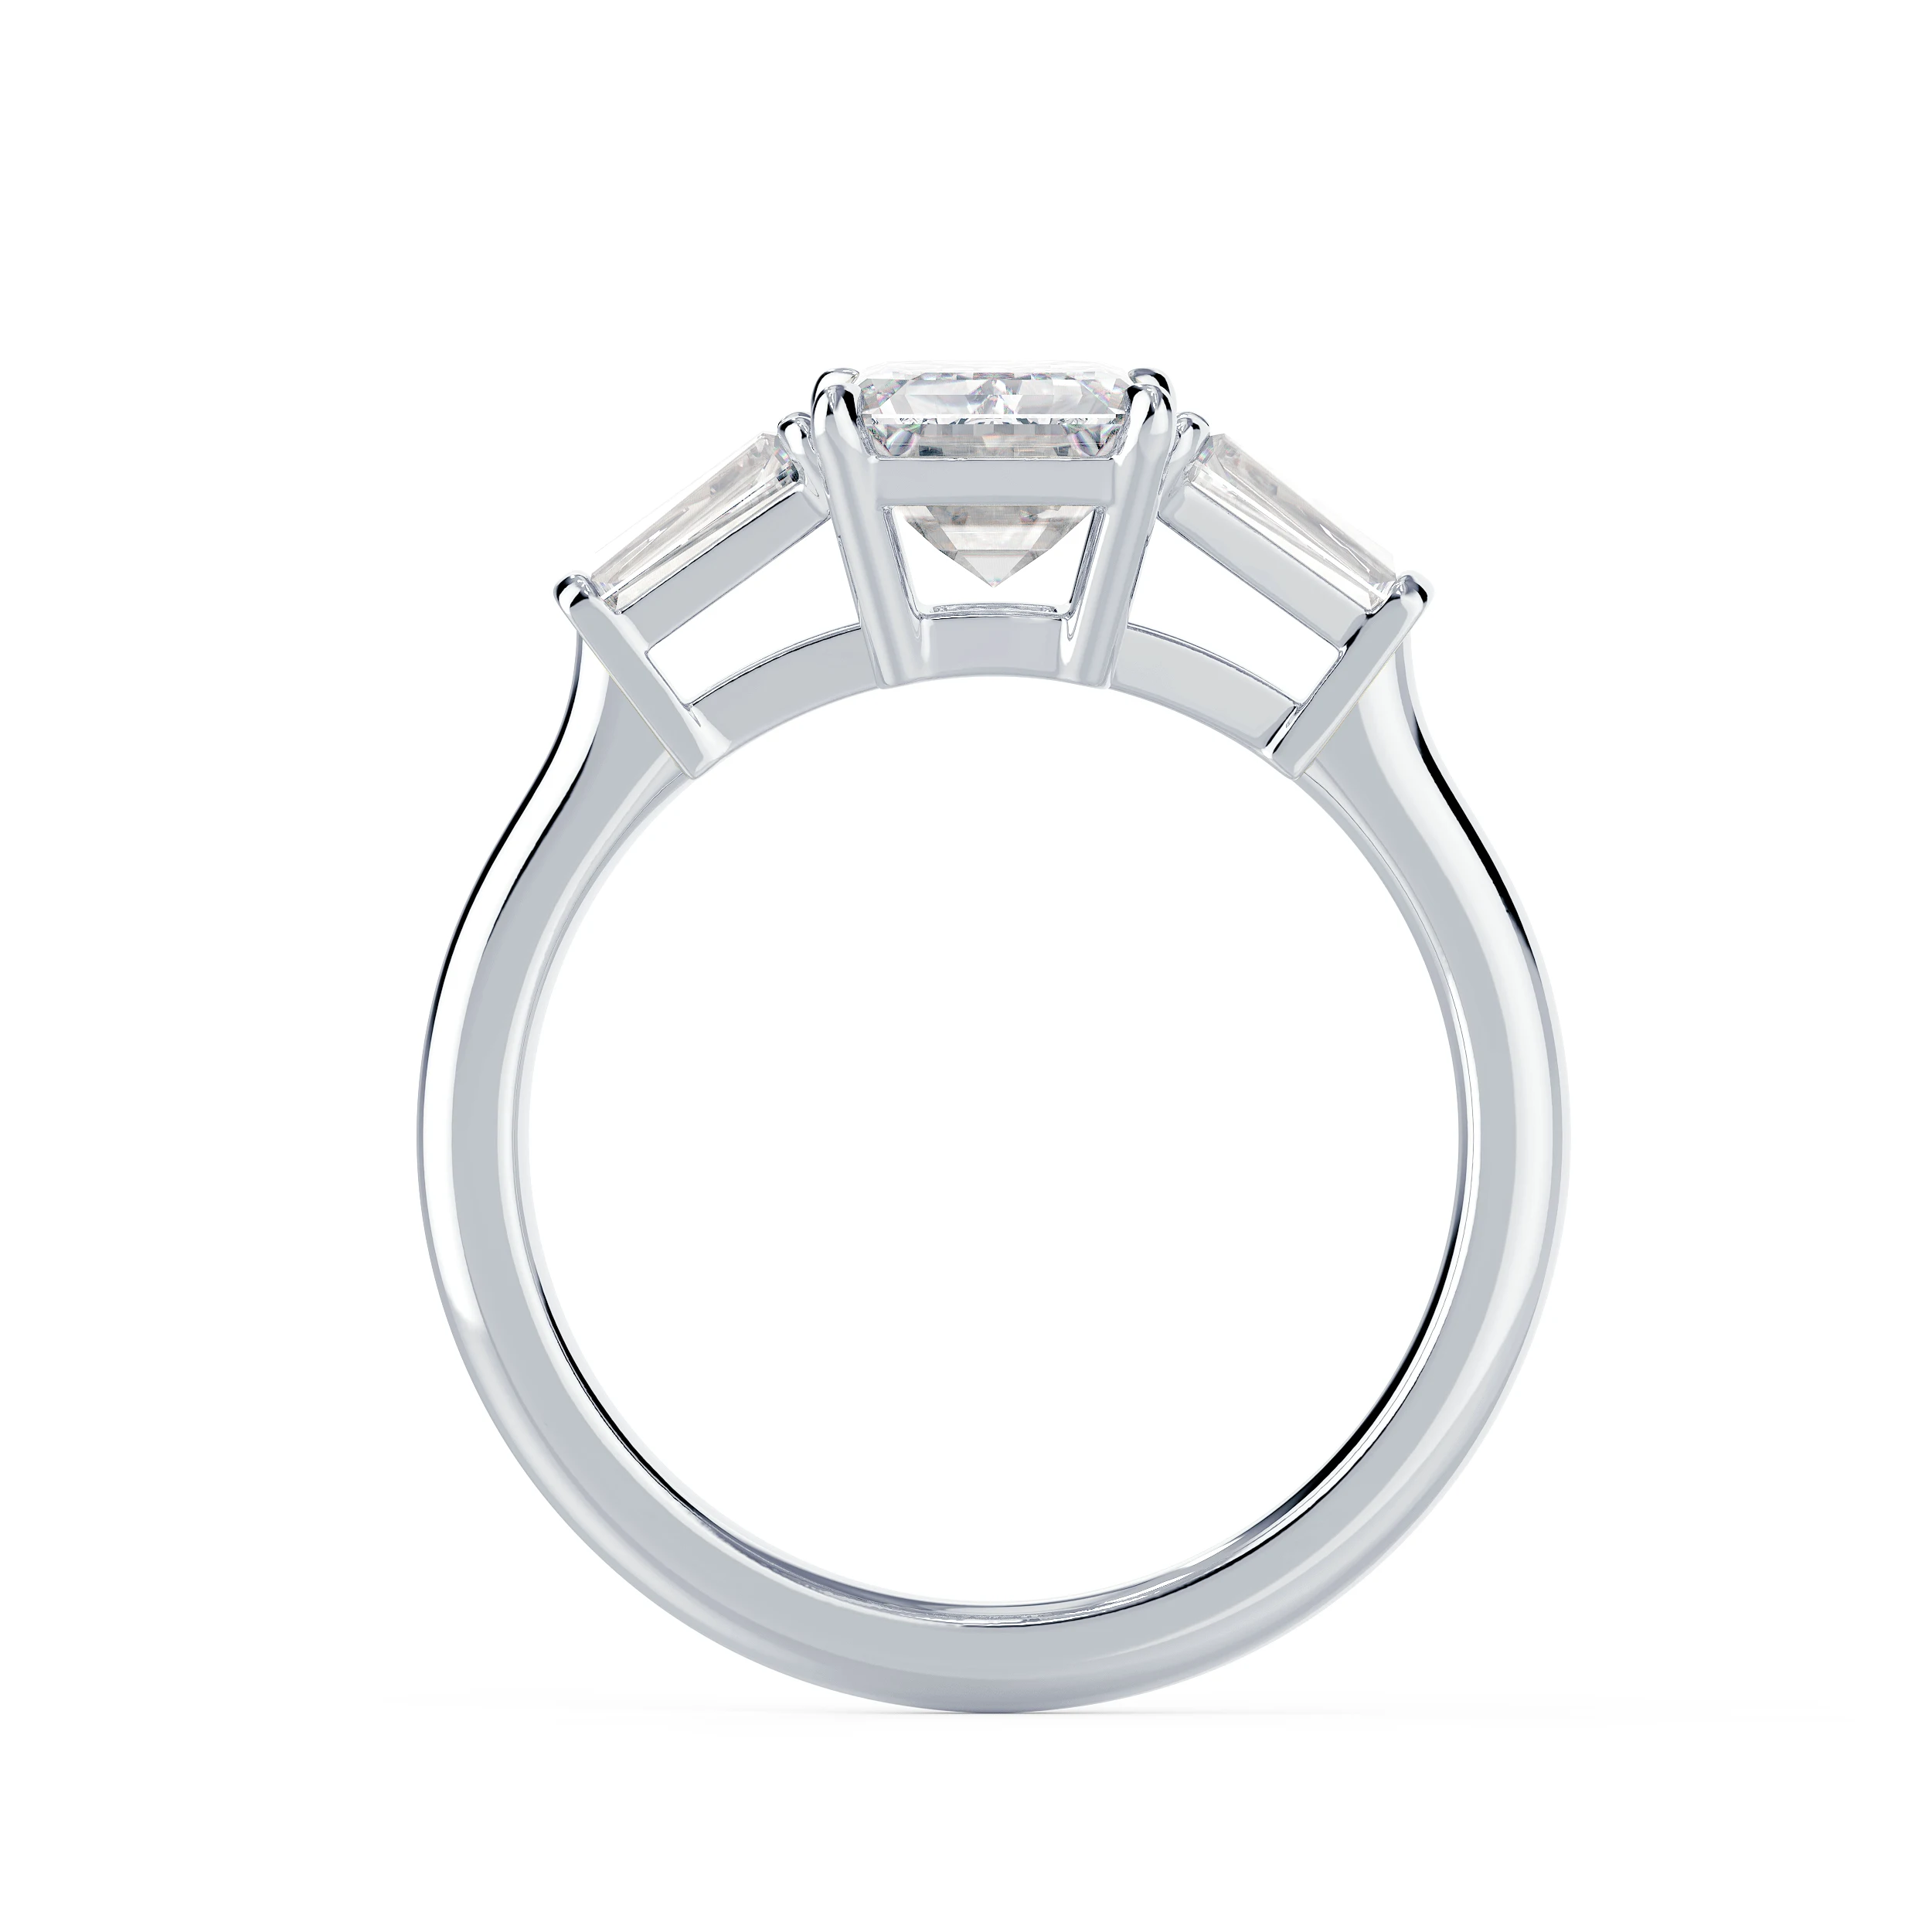 Lab Diamonds set in White Gold Emerald and Baguette Setting (Profile View)